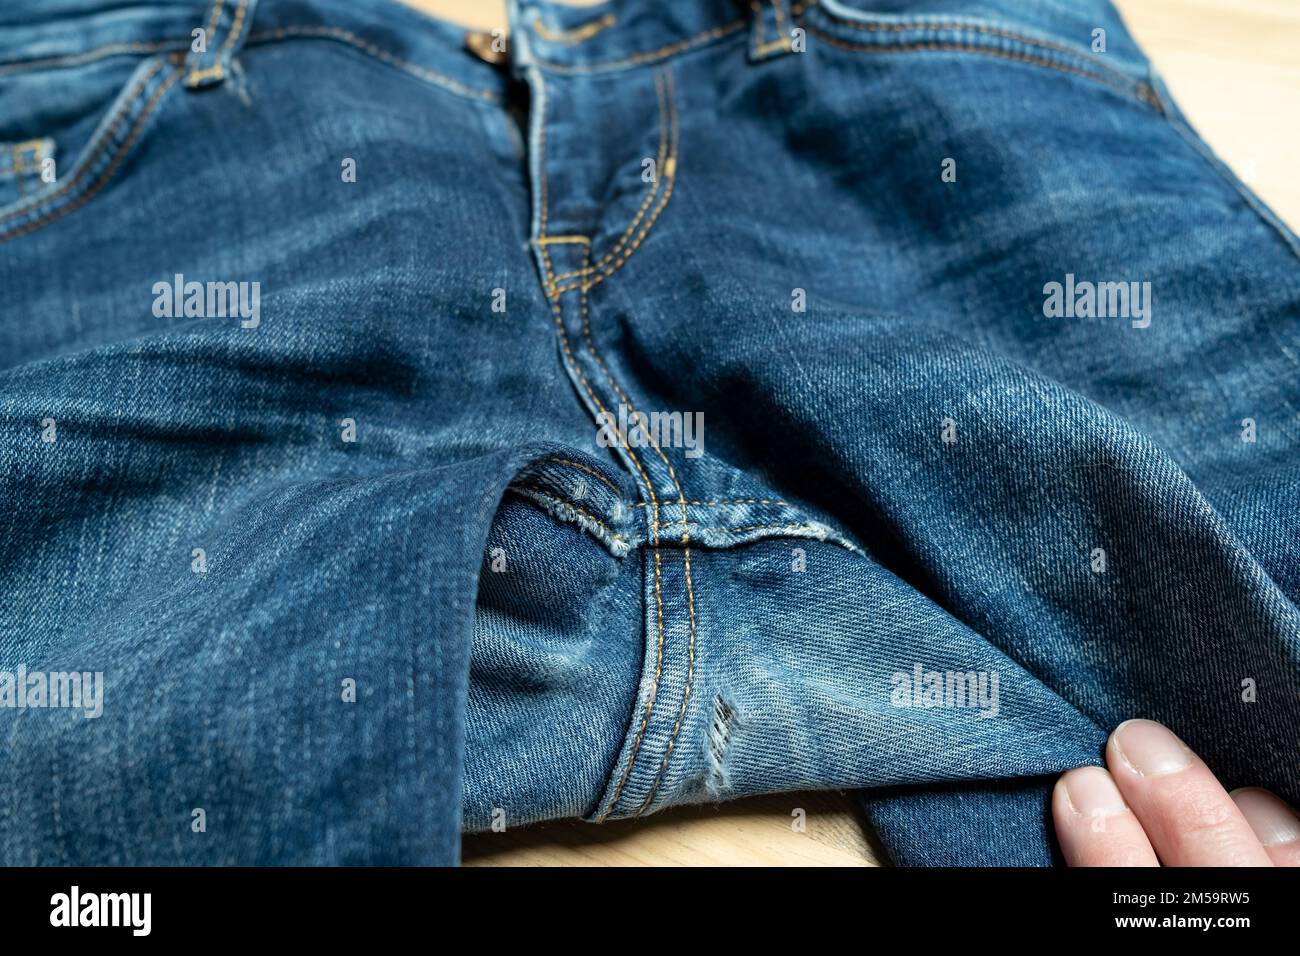 Hole in jeans. Worn, old denim trousers on a wooden table.  Stock Photo